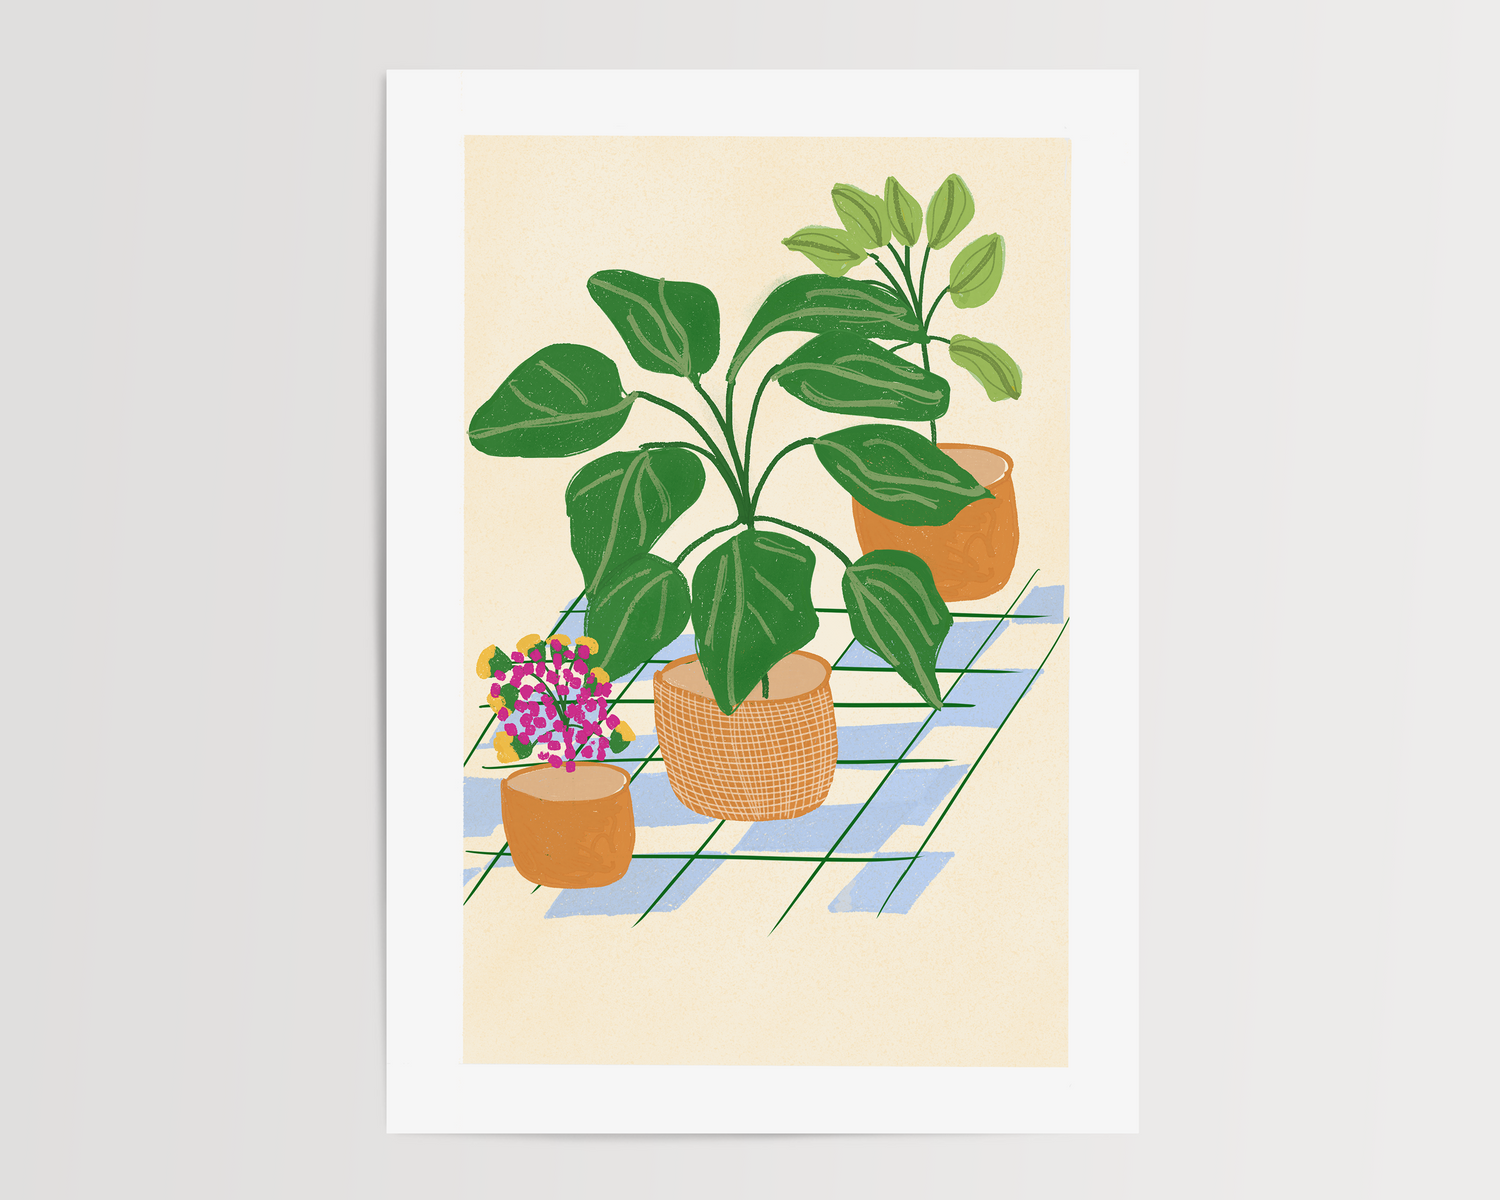 The House of Plants